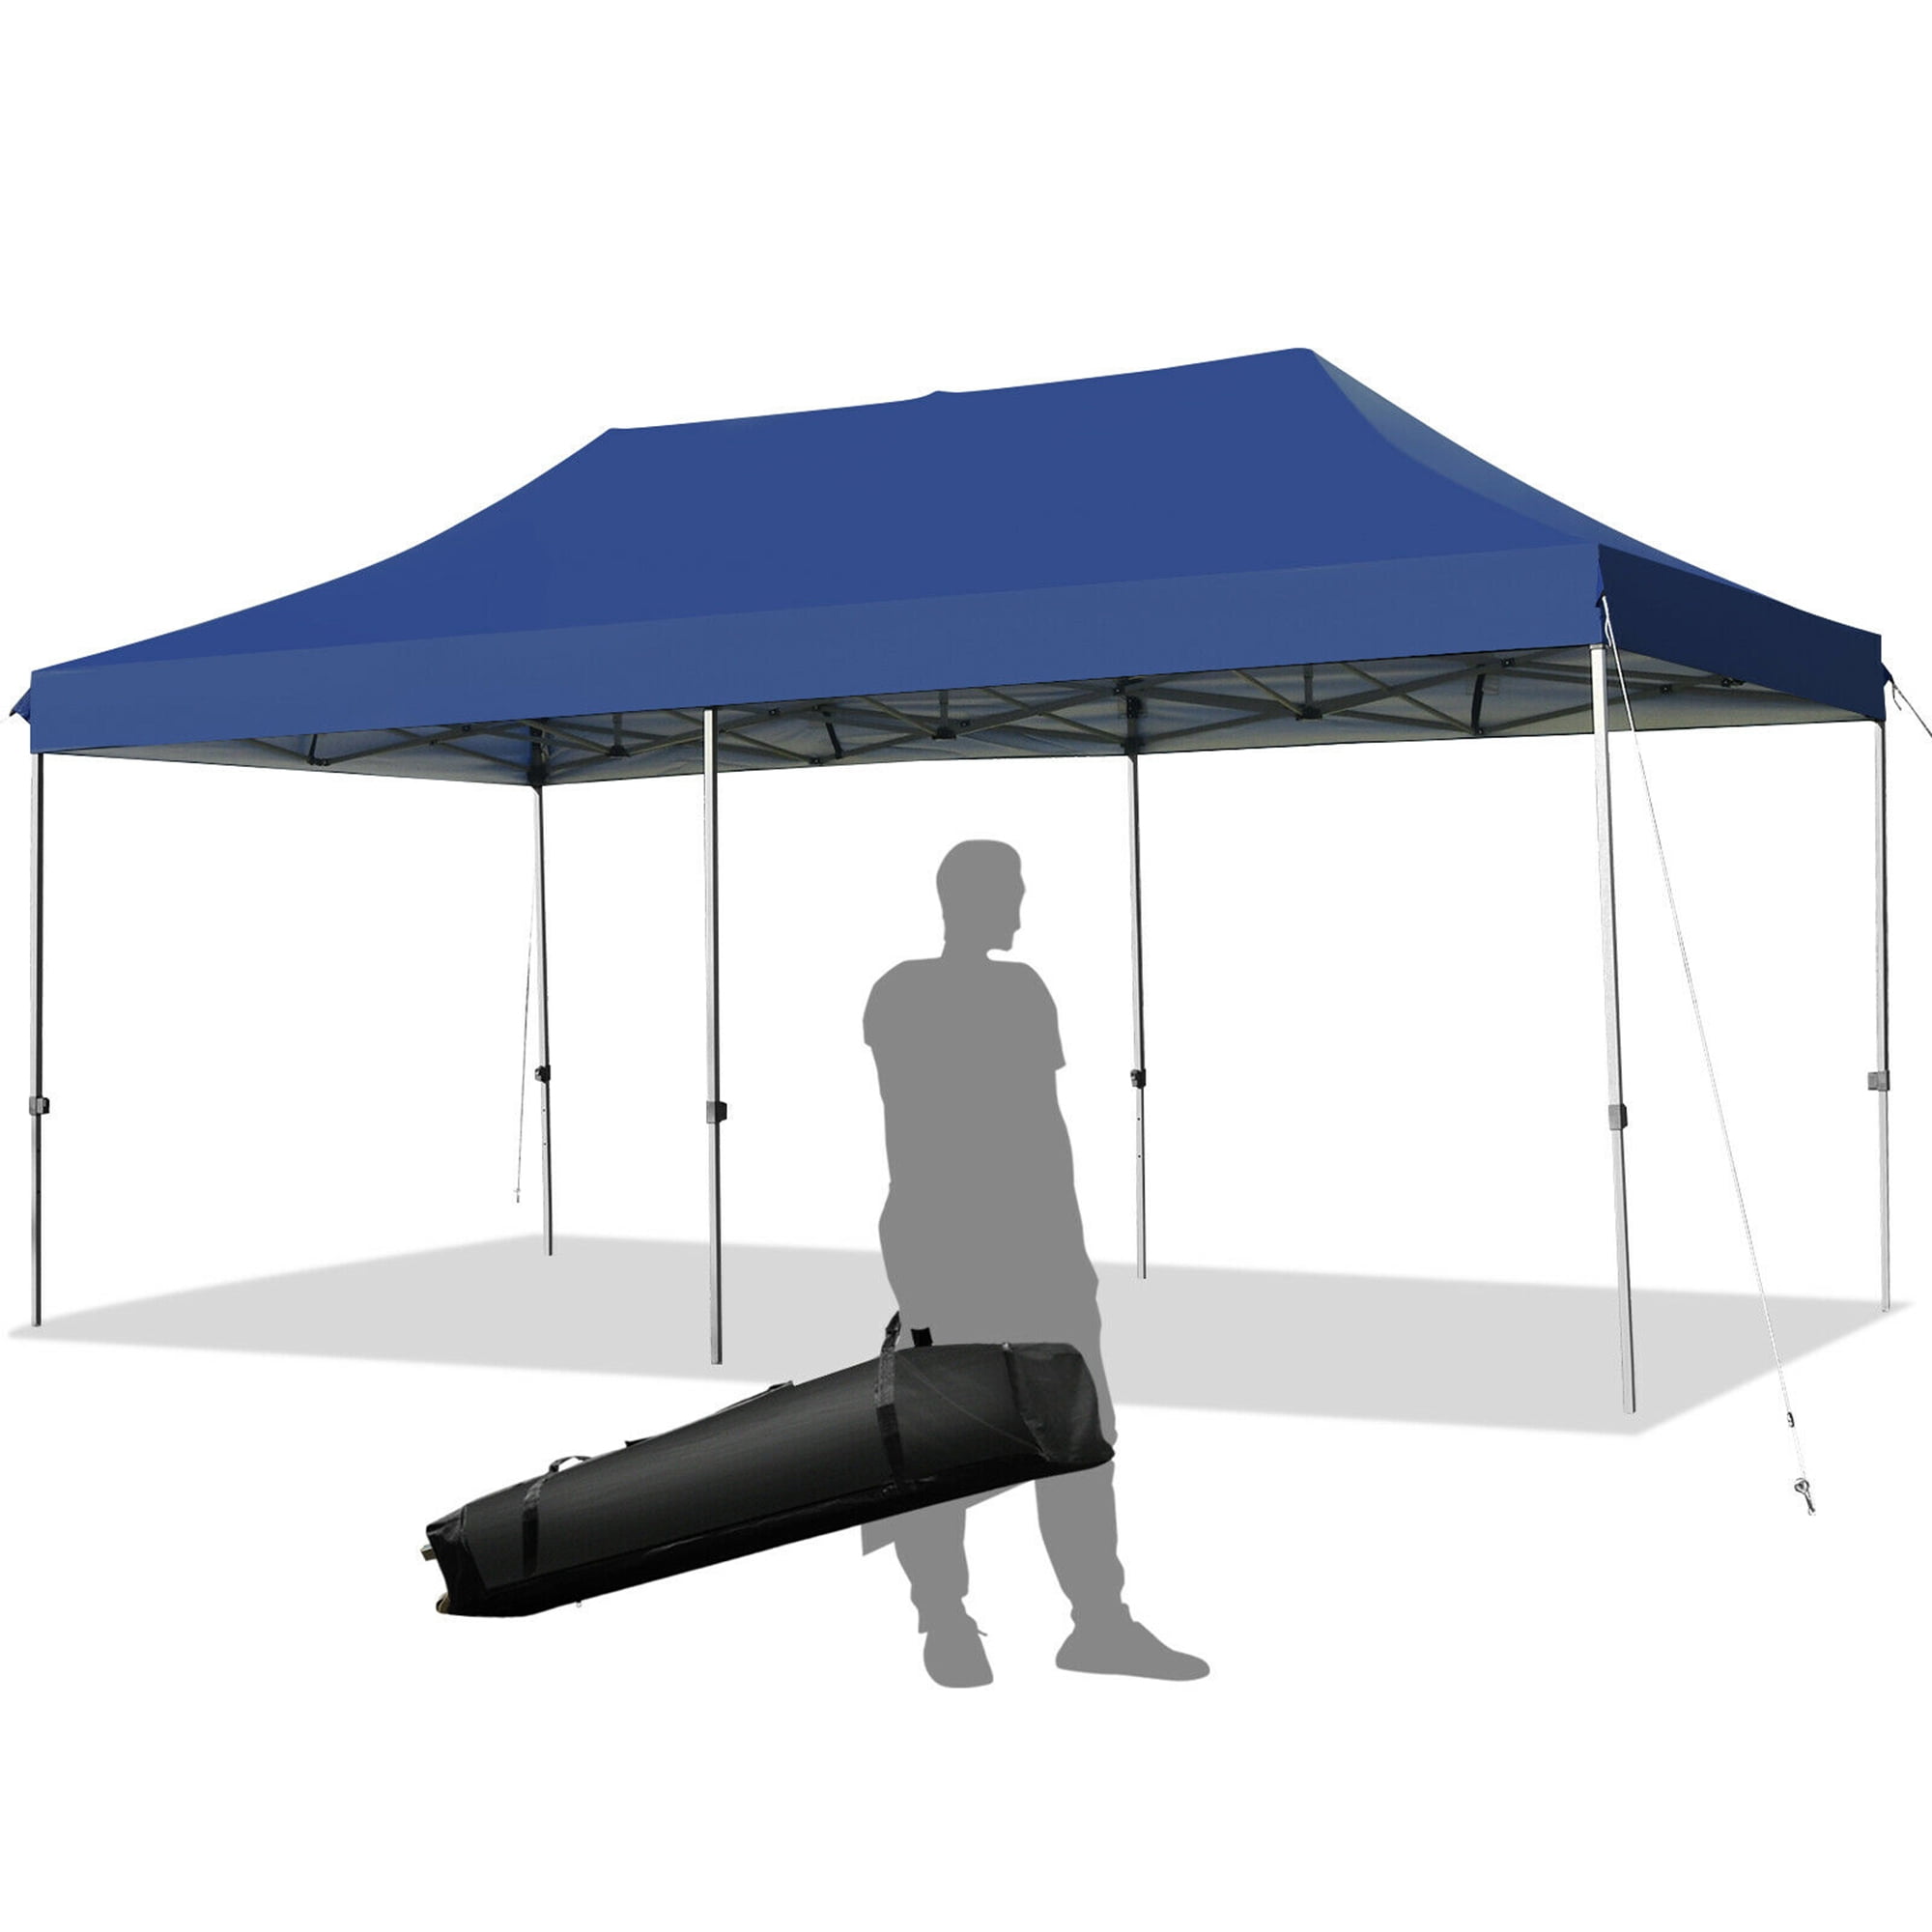 Best Choice Products 10x10ft Pop Up Canopy Outdoor Portable Adjustable Instant Gazebo Tent w/ Carrying Bag - Light Gray